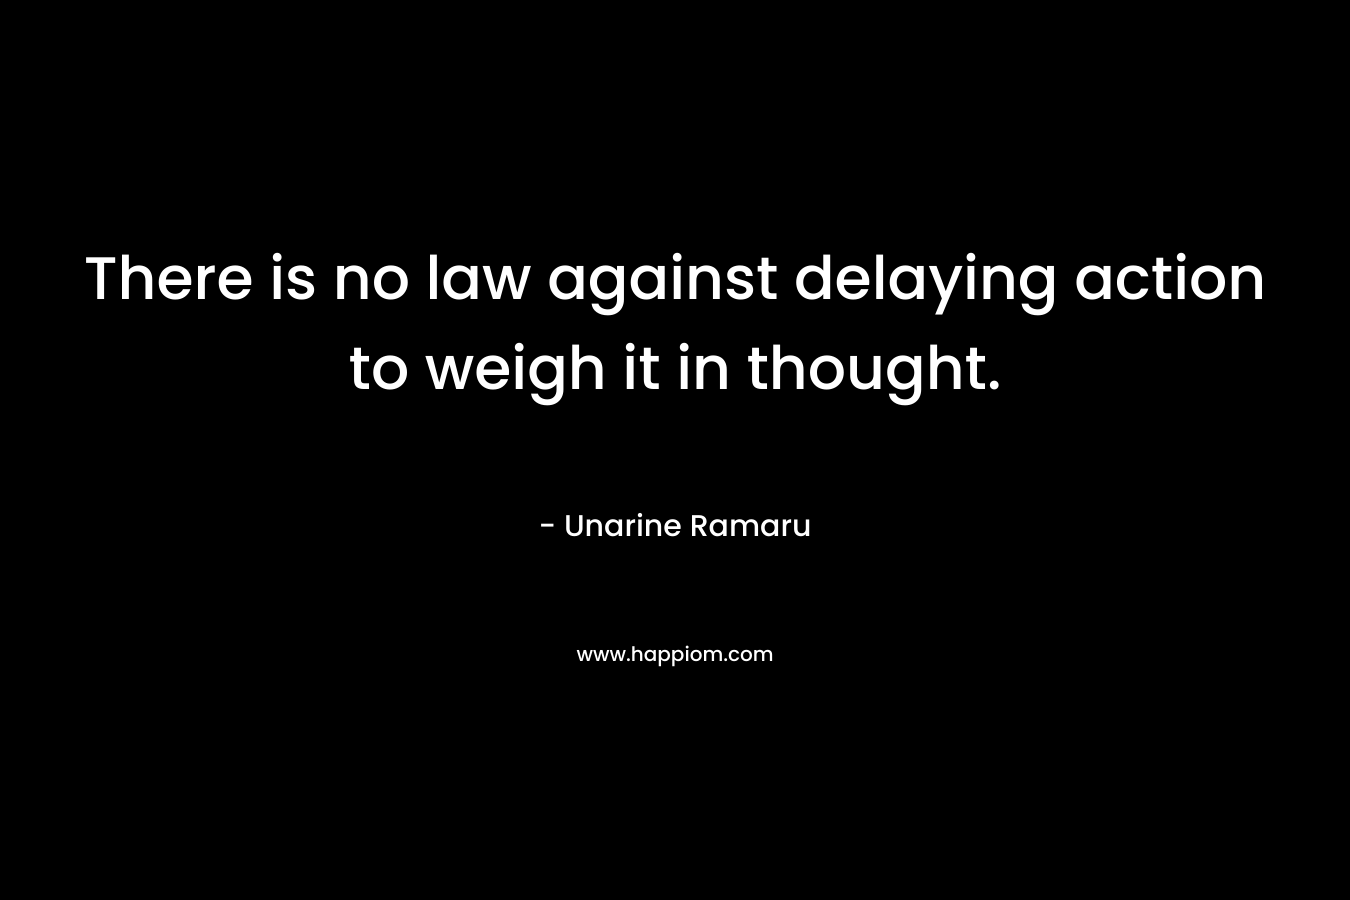 There is no law against delaying action to weigh it in thought.